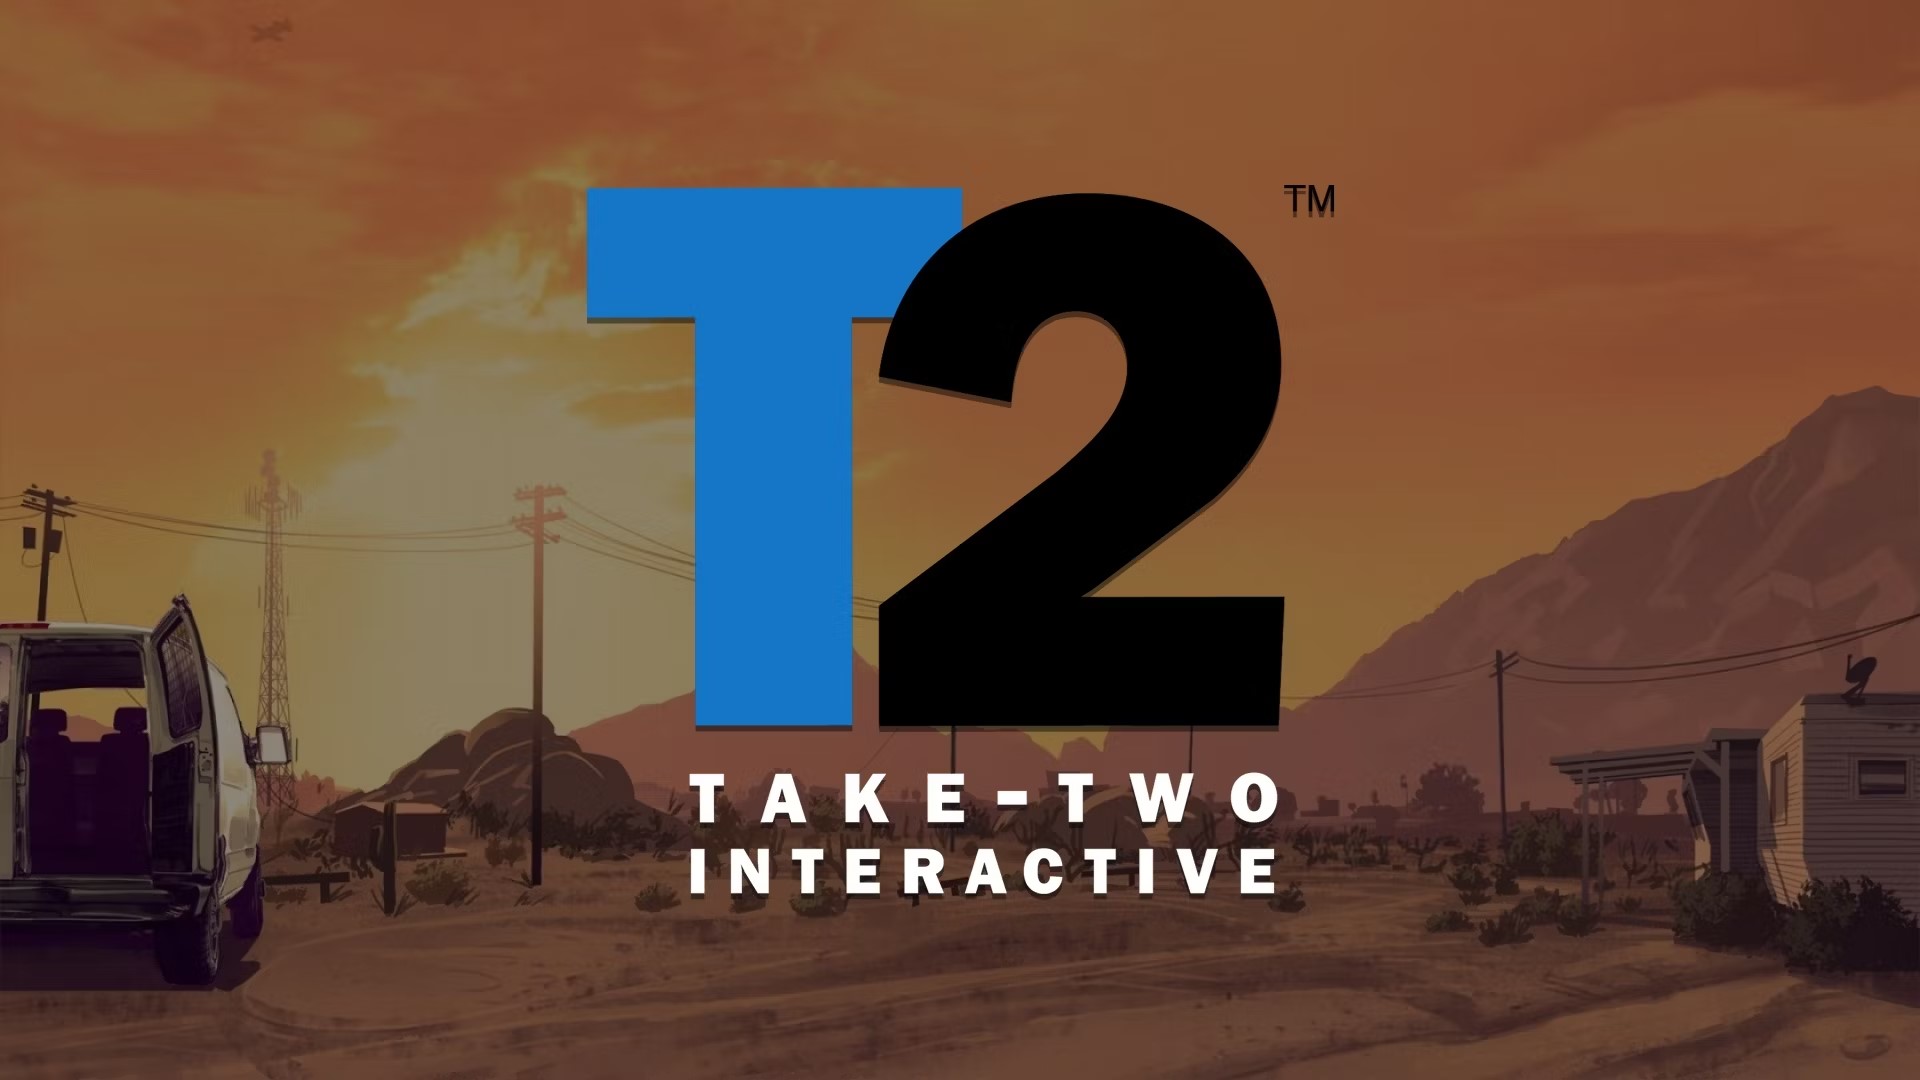 Take-Two Said Canceled Games Weren’t “Core Franchise”